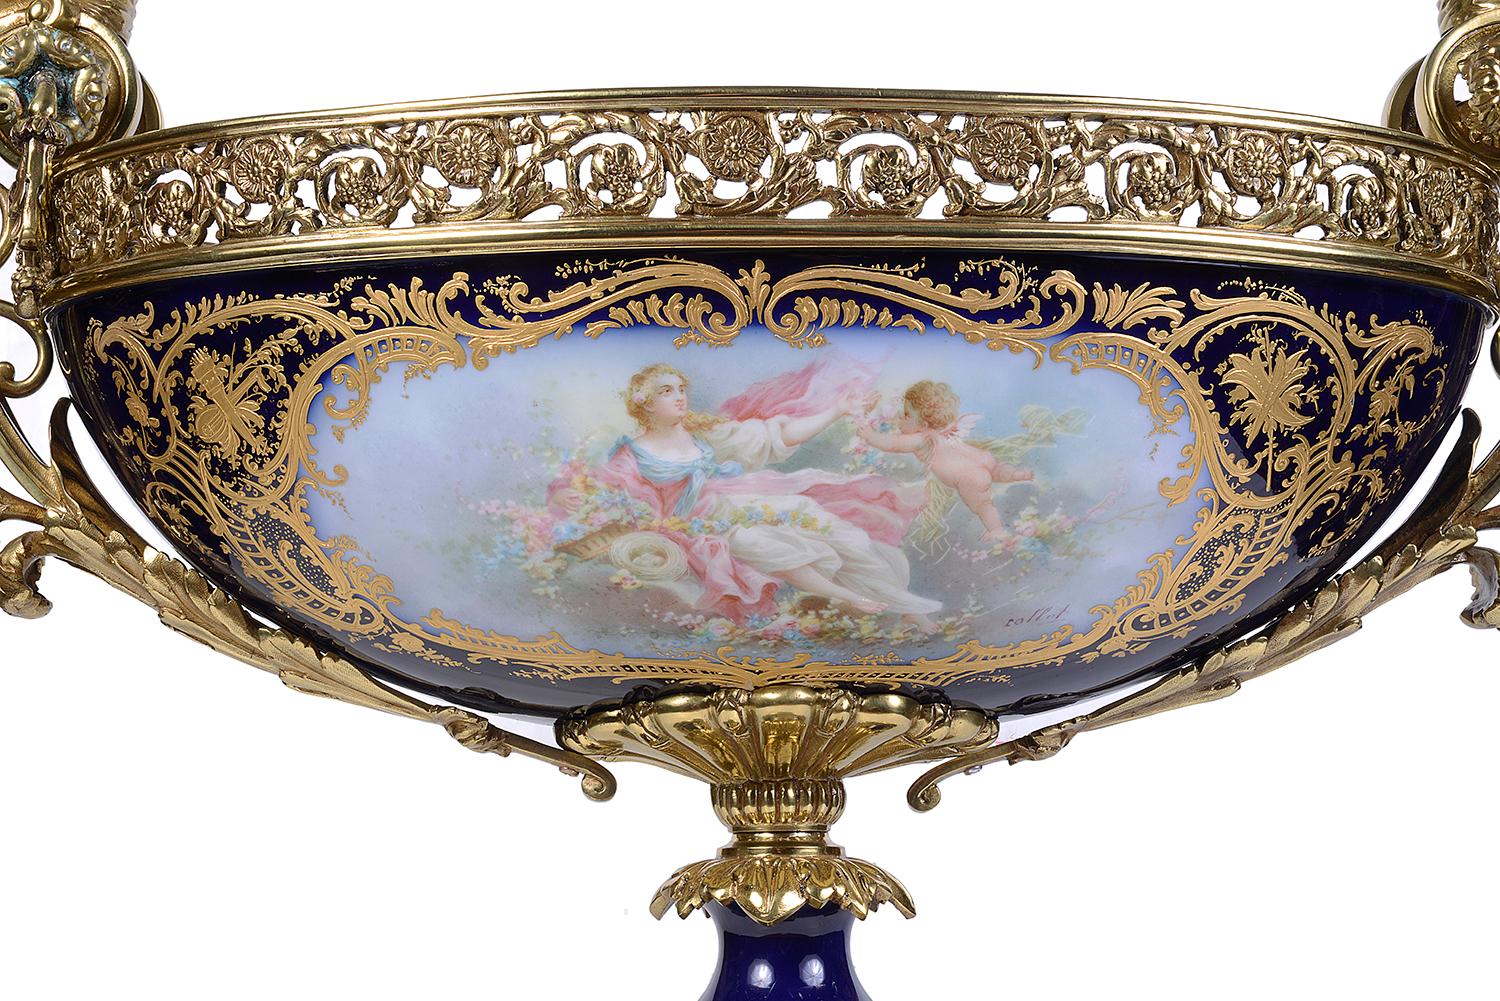 A good quality late 19th Century French Sevres style porcelain comport, having gilded ormolu classical female mounted handles on either side, above a pierced collar, a cobalt blue ground with gilded decoration, inset painted panels depicting a